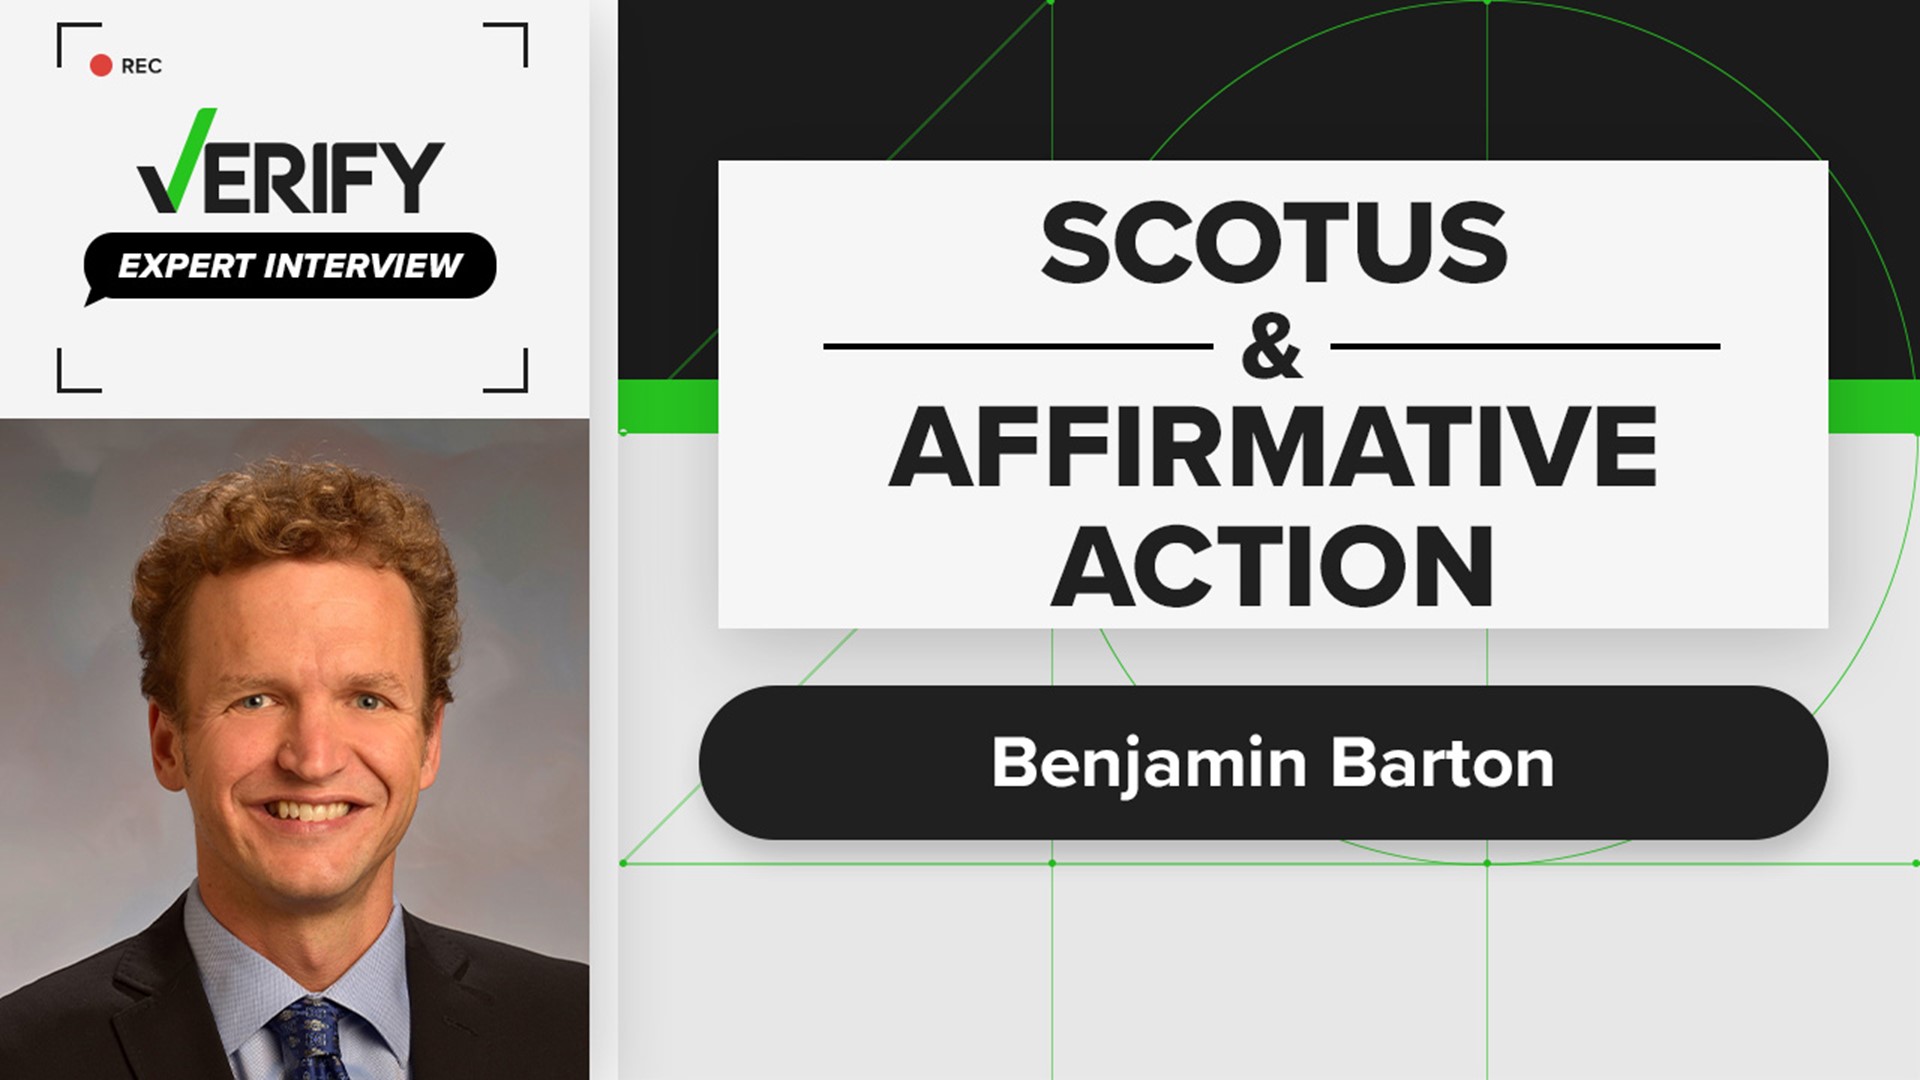 Law professor Ben Barton explains how college admissions could be affected by the Supreme Court's affirmative action decision